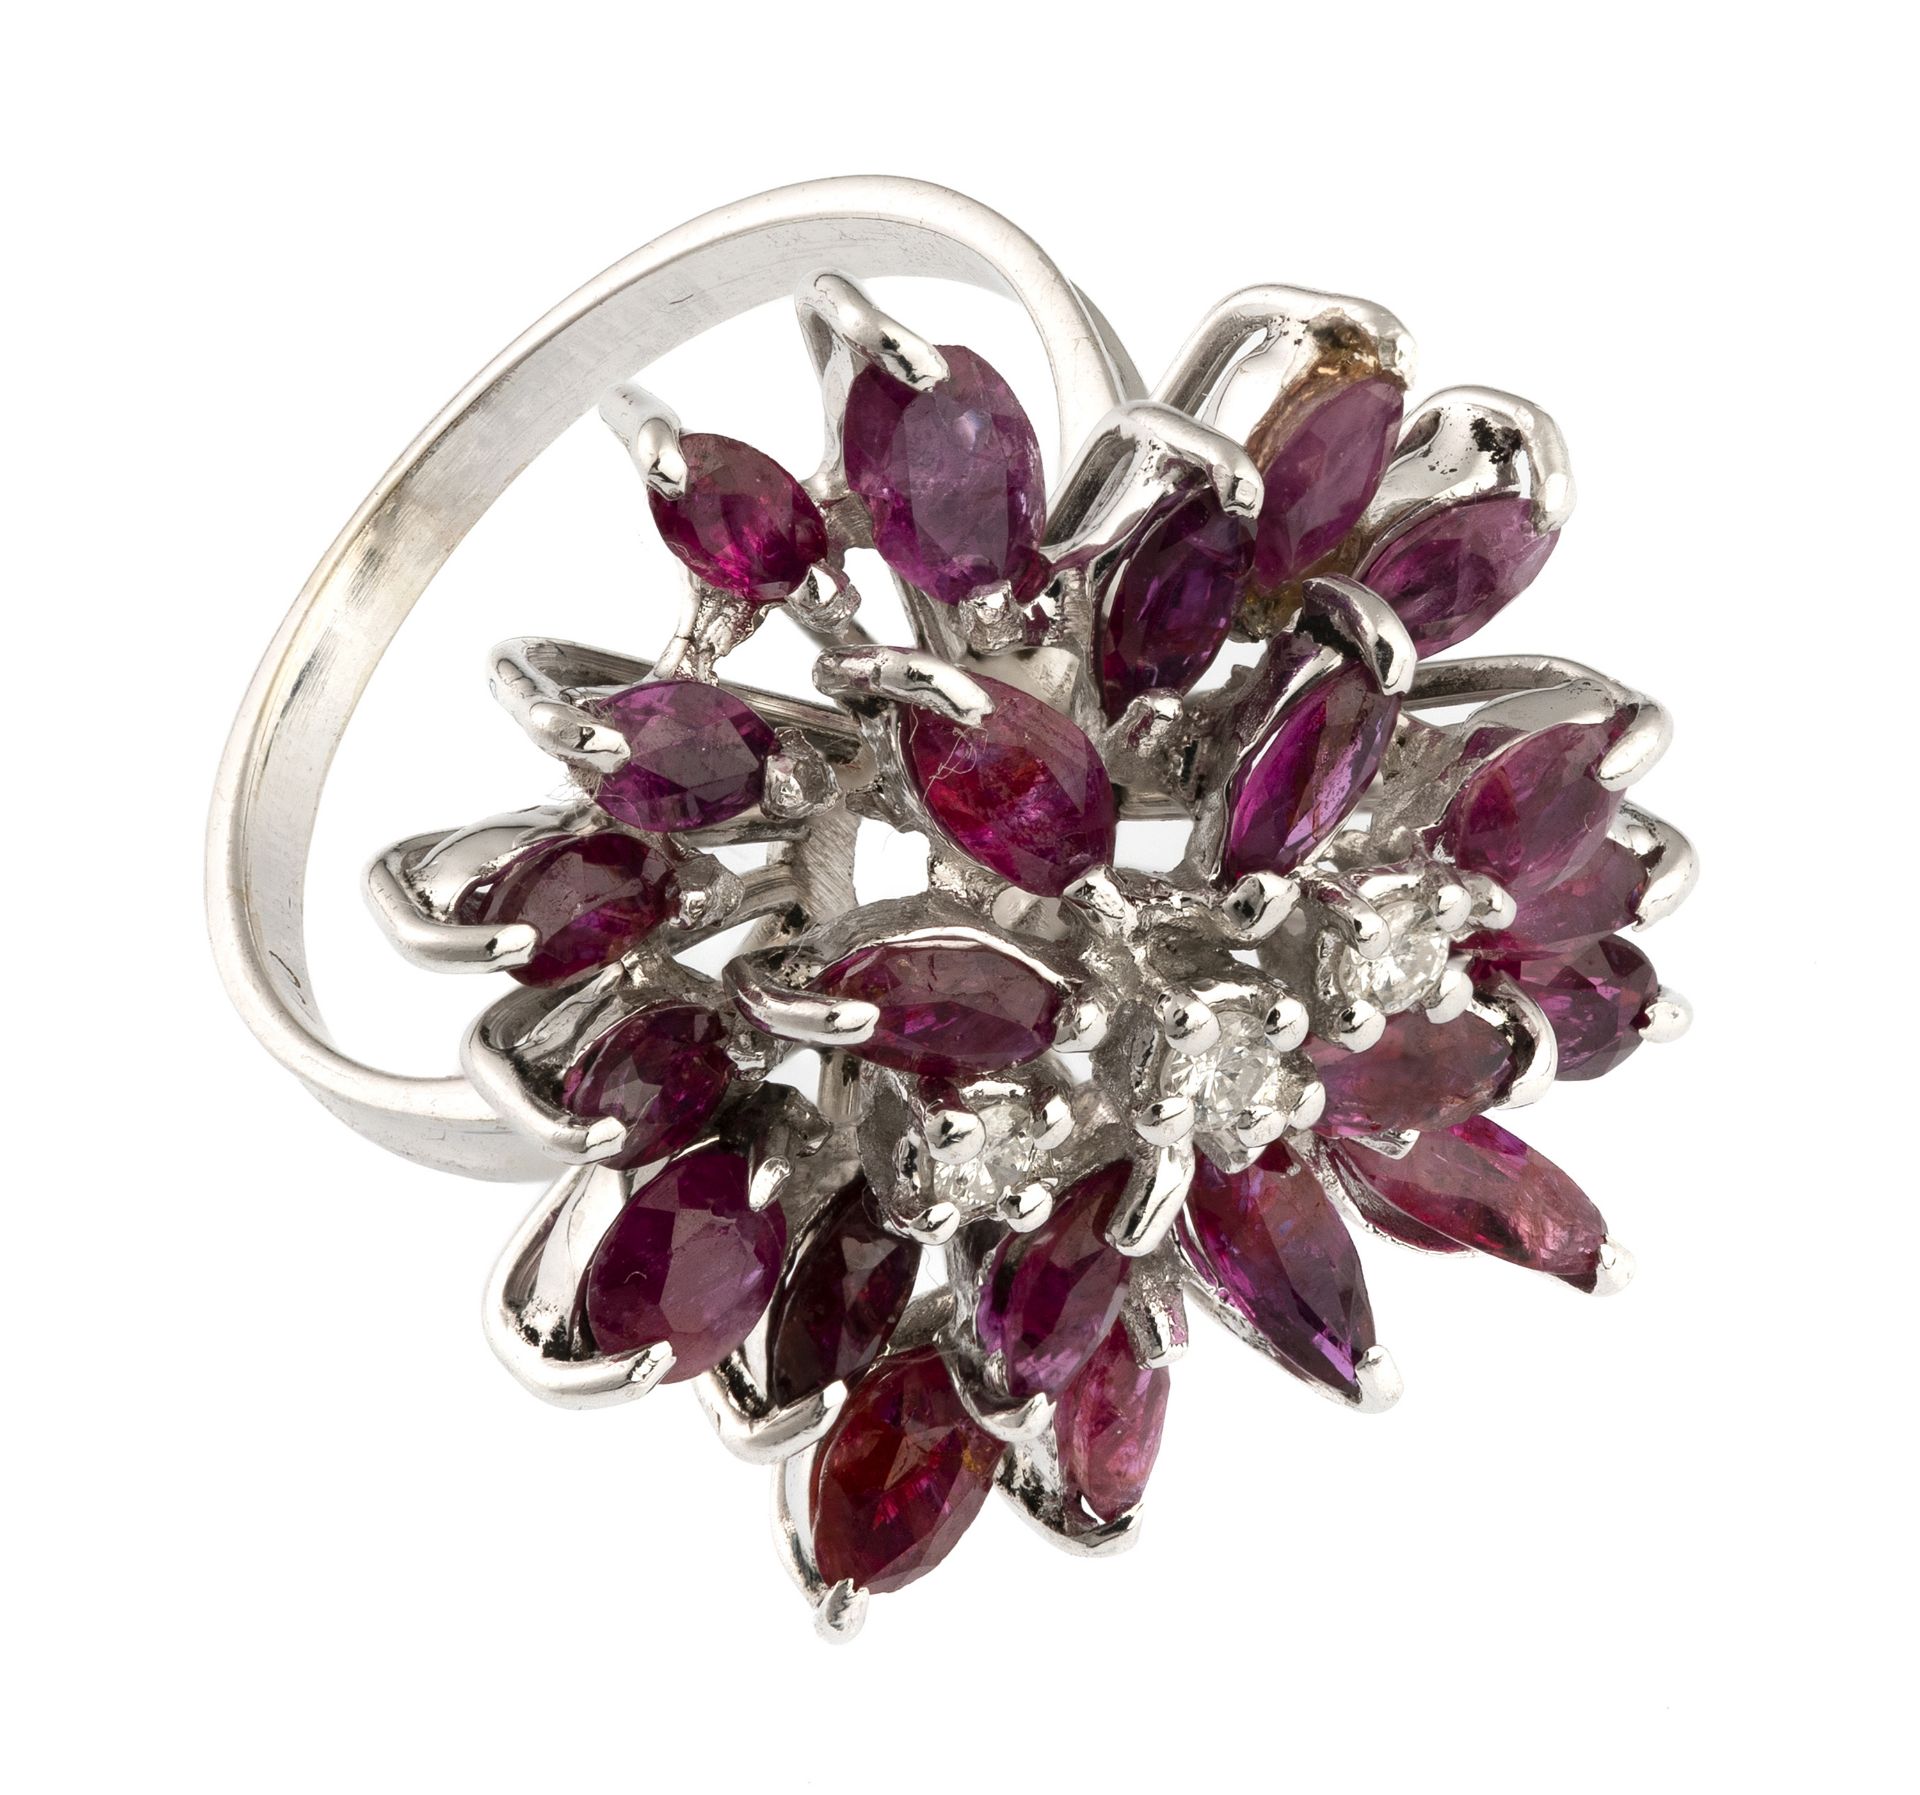 WHITE GOLD RING WITH DIAMONDS AND RUBIES